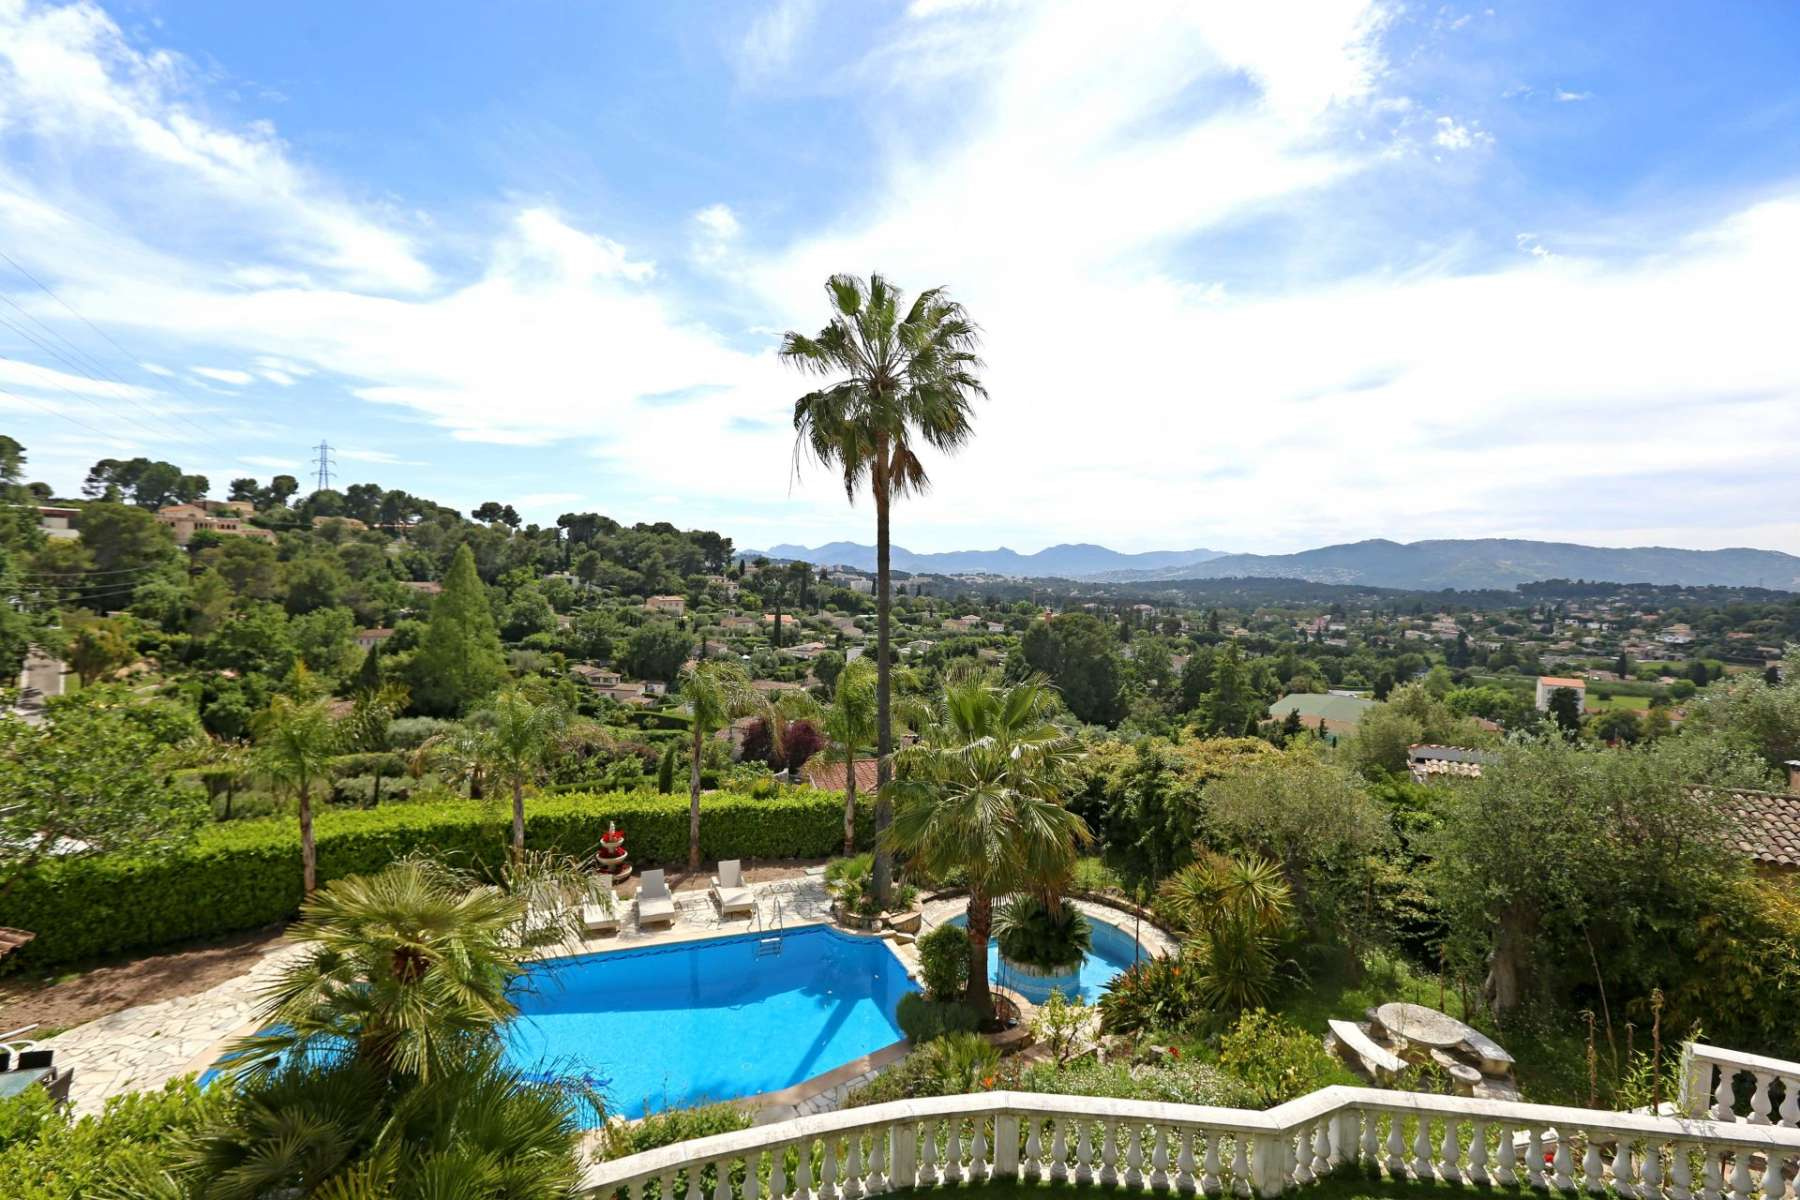 Villa with pool and nice view over Mougins